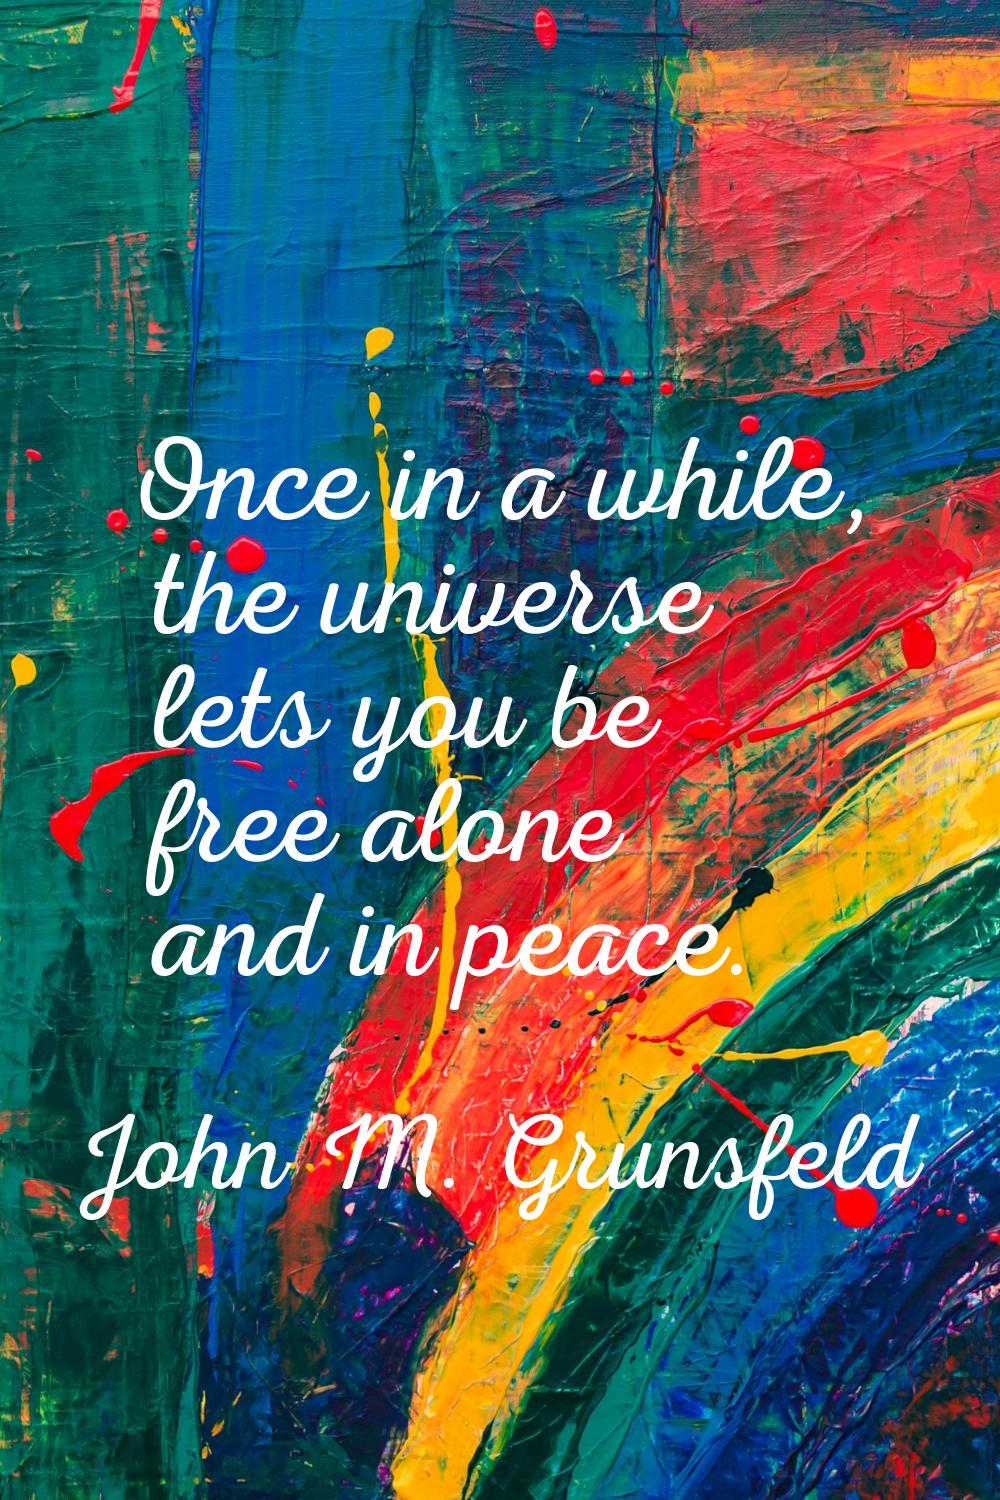 Once in a while, the universe lets you be free alone and in peace.